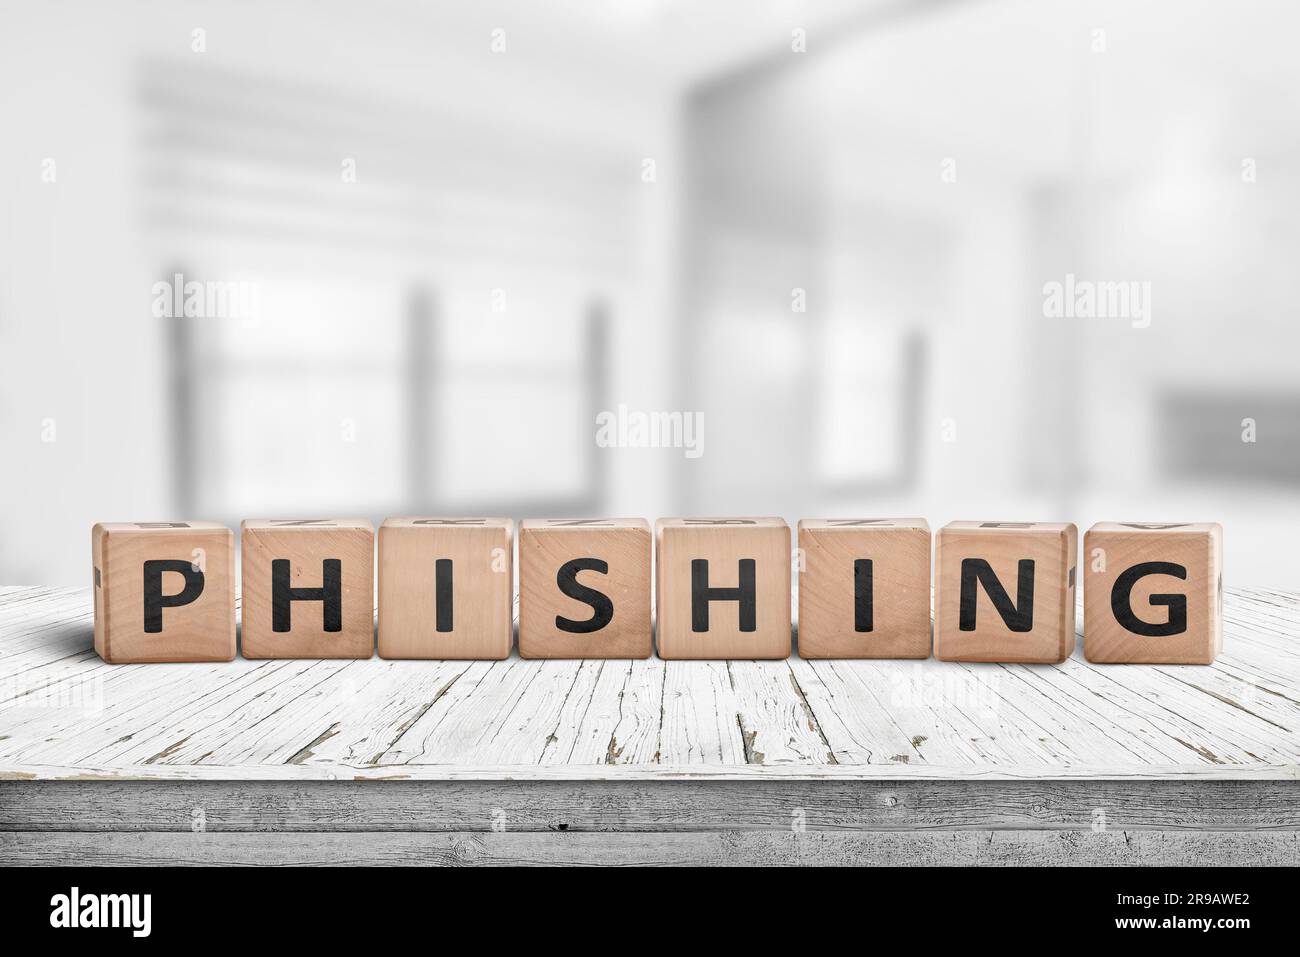 Phishing scam sign on a wooden table in a bright office with blocks Stock Photo